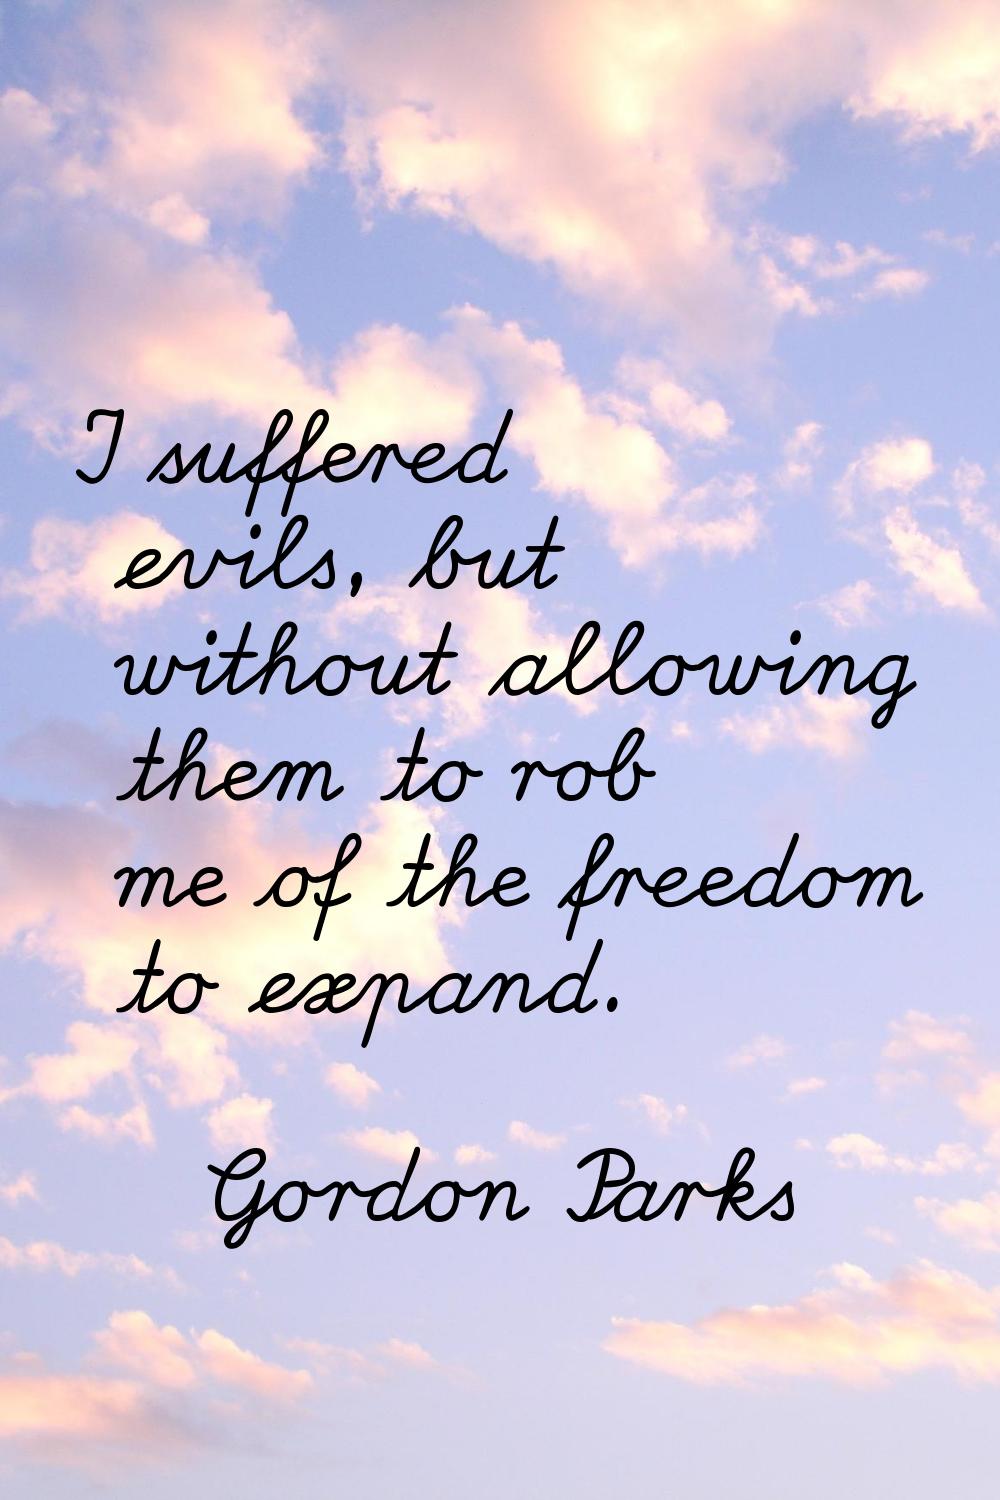 I suffered evils, but without allowing them to rob me of the freedom to expand.